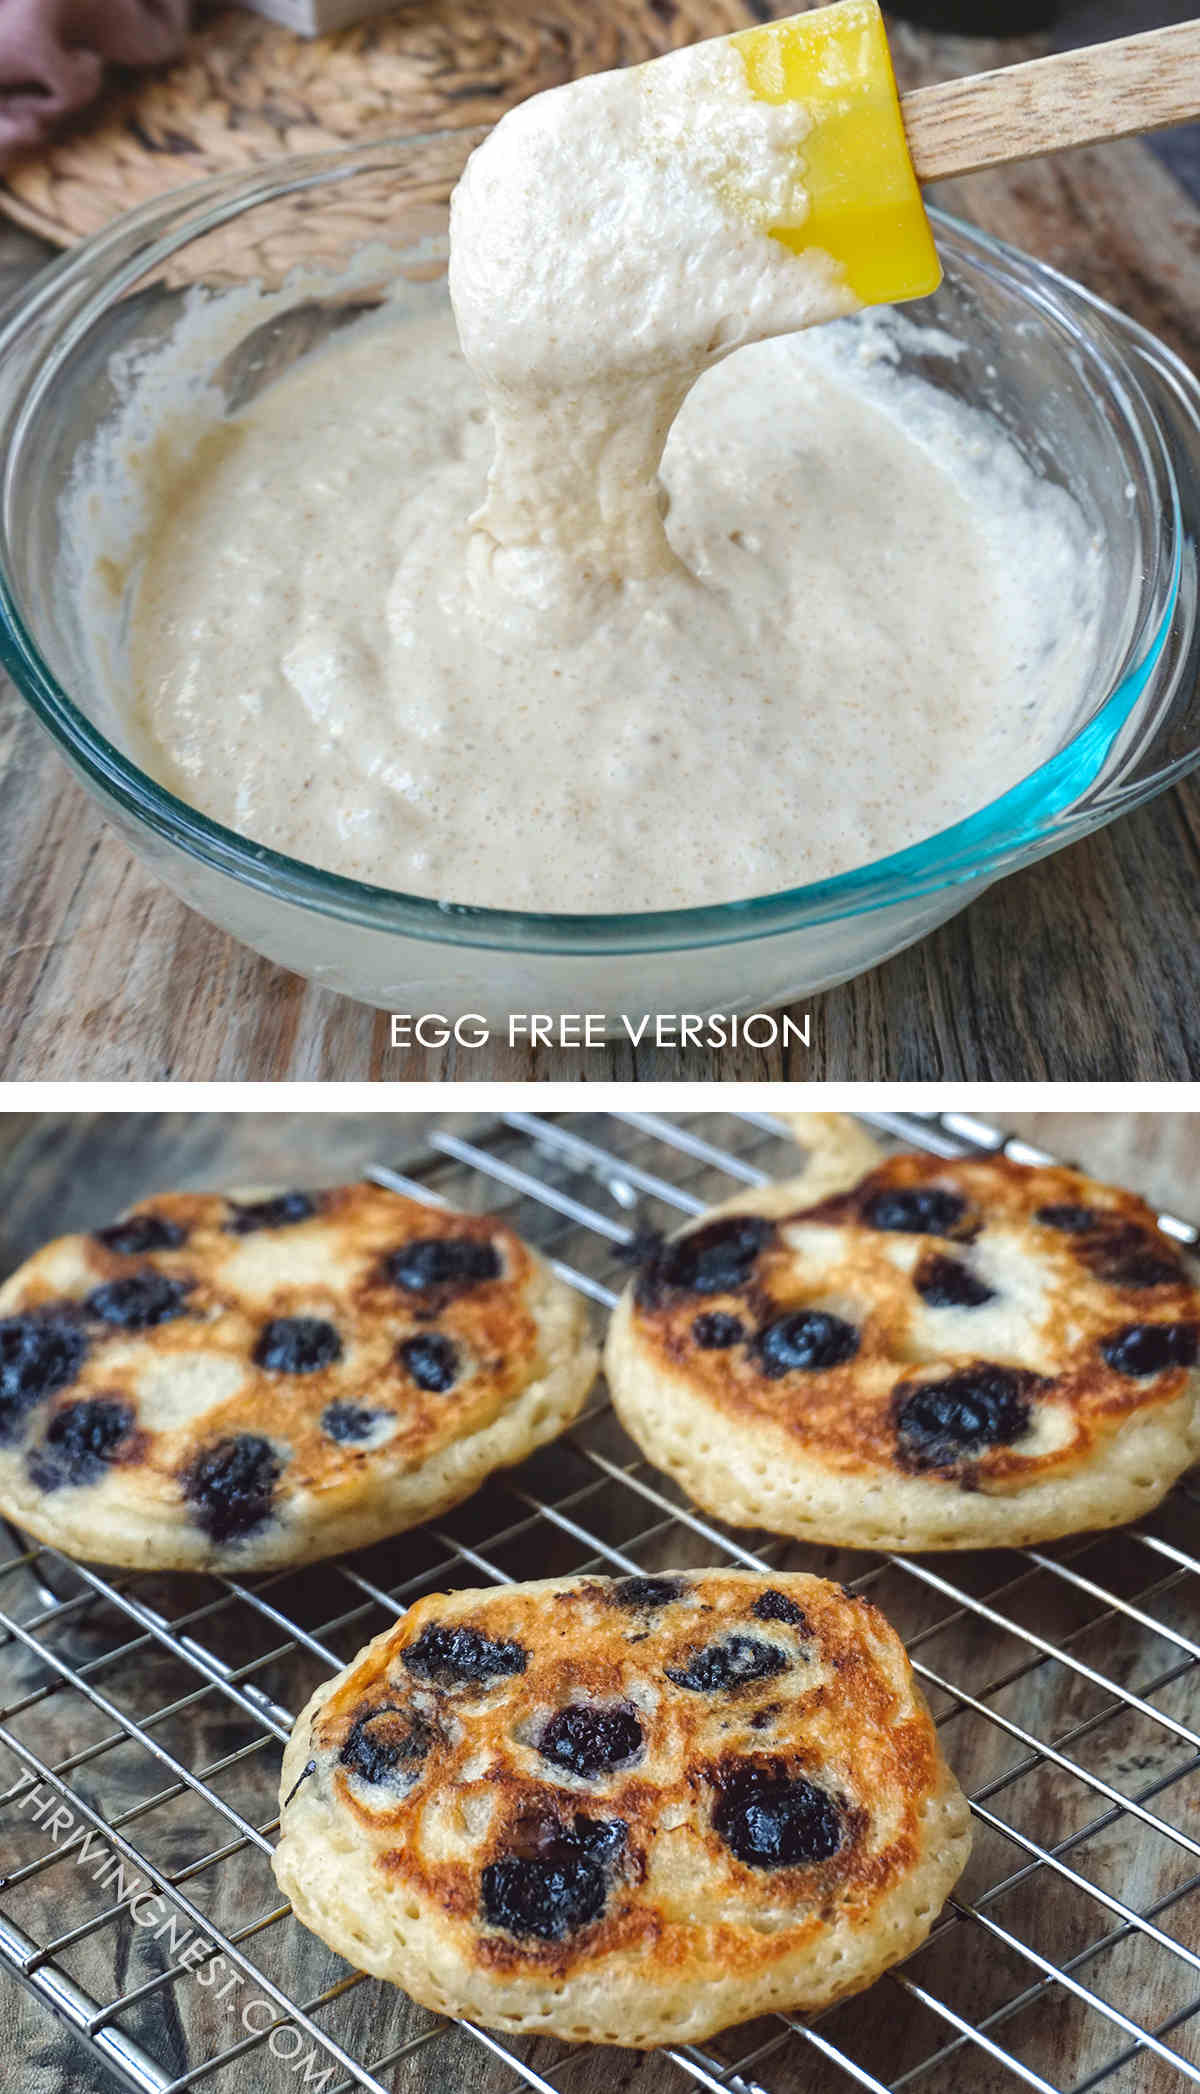 The right consistency of egg free pancake batter and cooked egg free baby blueberry pancakes cooling on a rack.